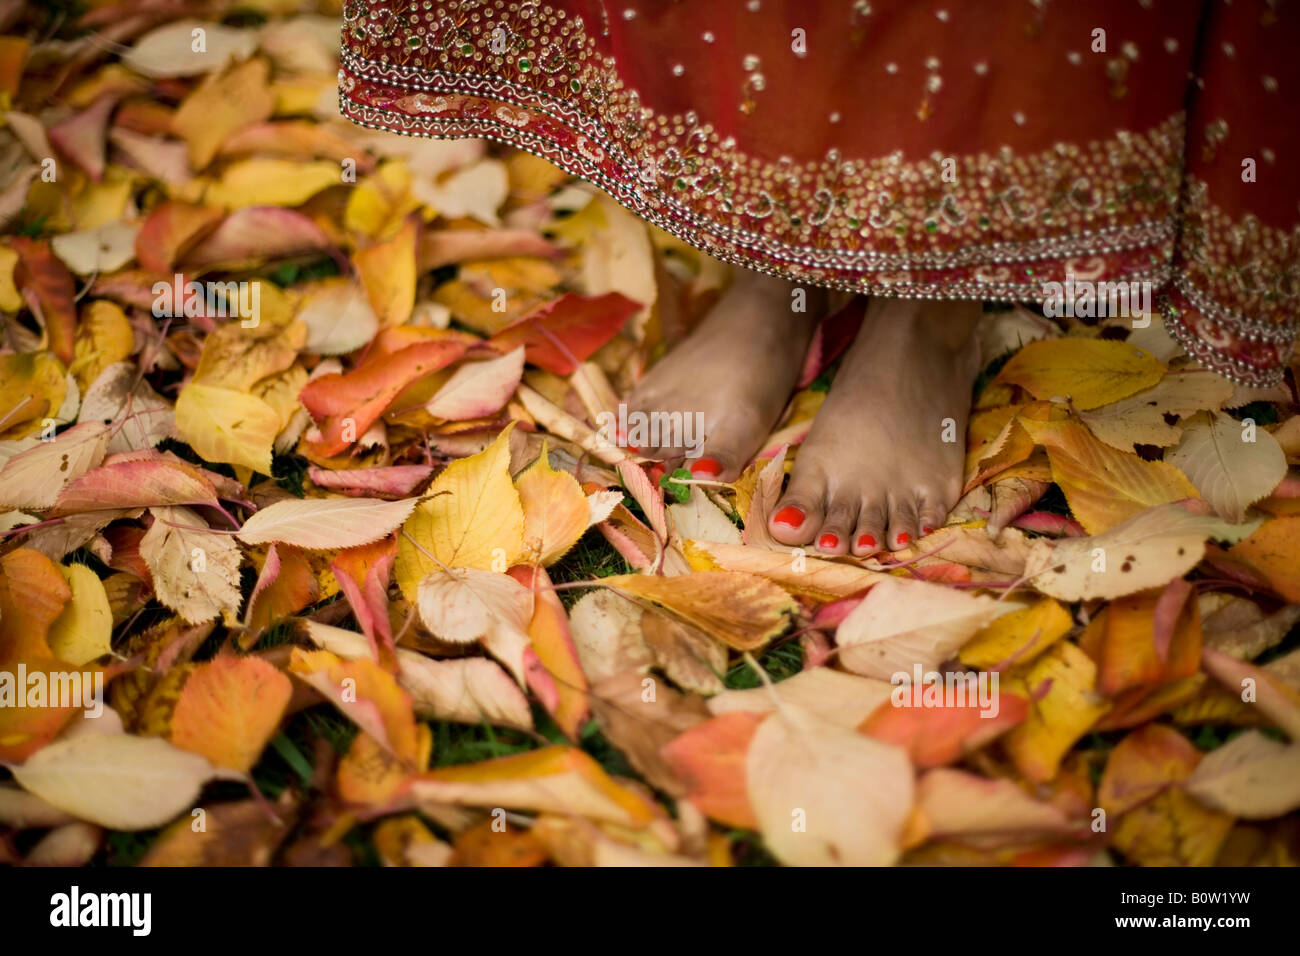 Feet of a Pakistani woman 30s wears traditional clothing in a garden with autumn leaves Stock Photo